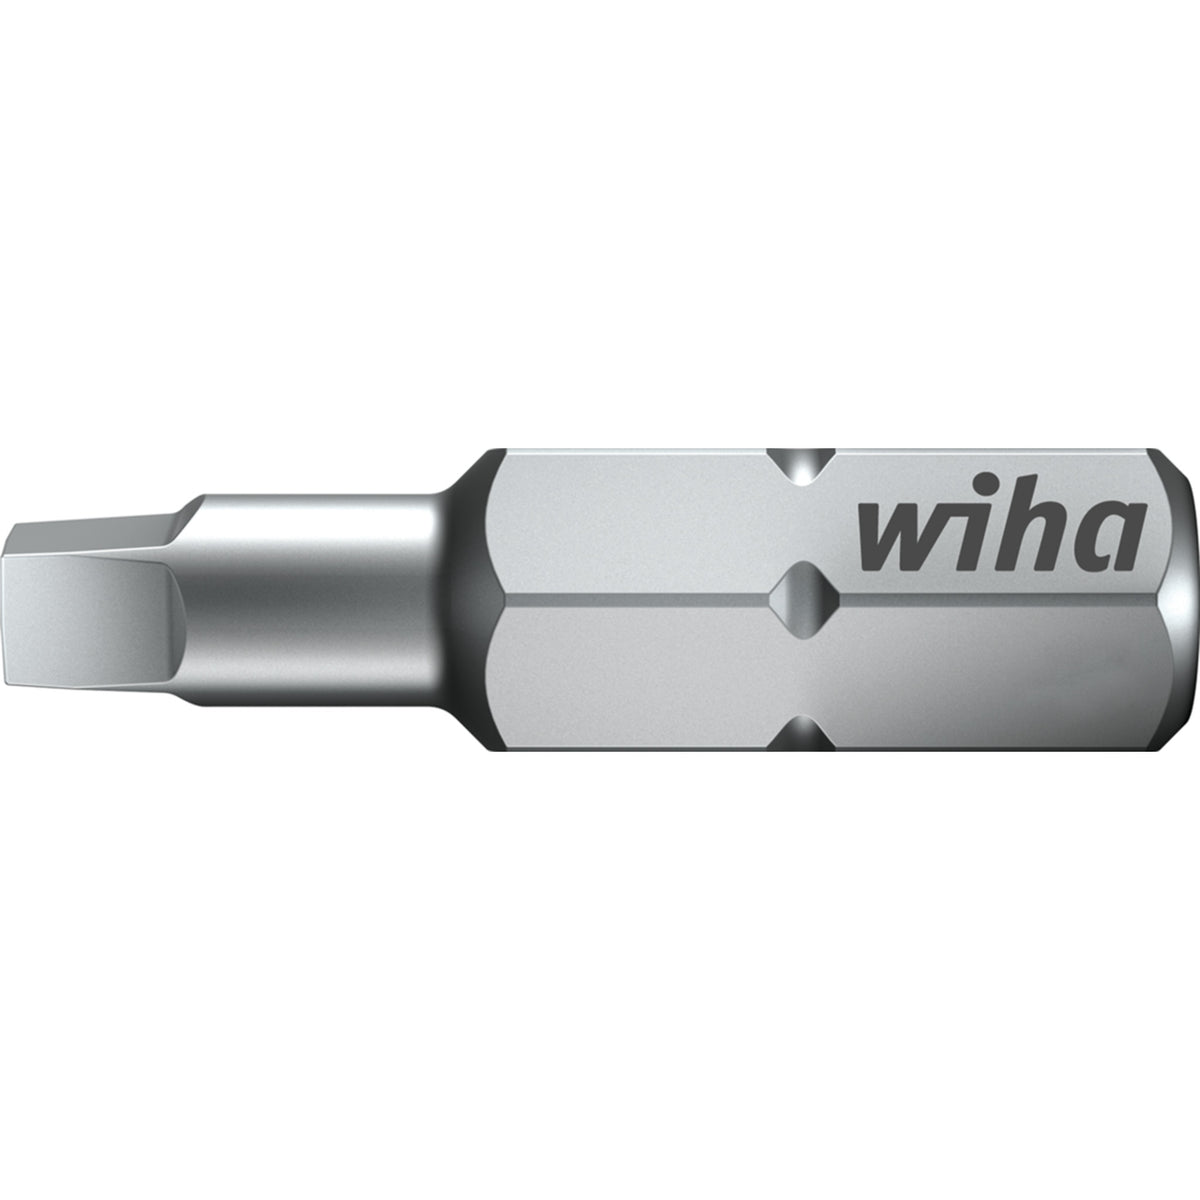 Wiha 72346 Square Contractor Bits #3 x 25mm - 250 Pack